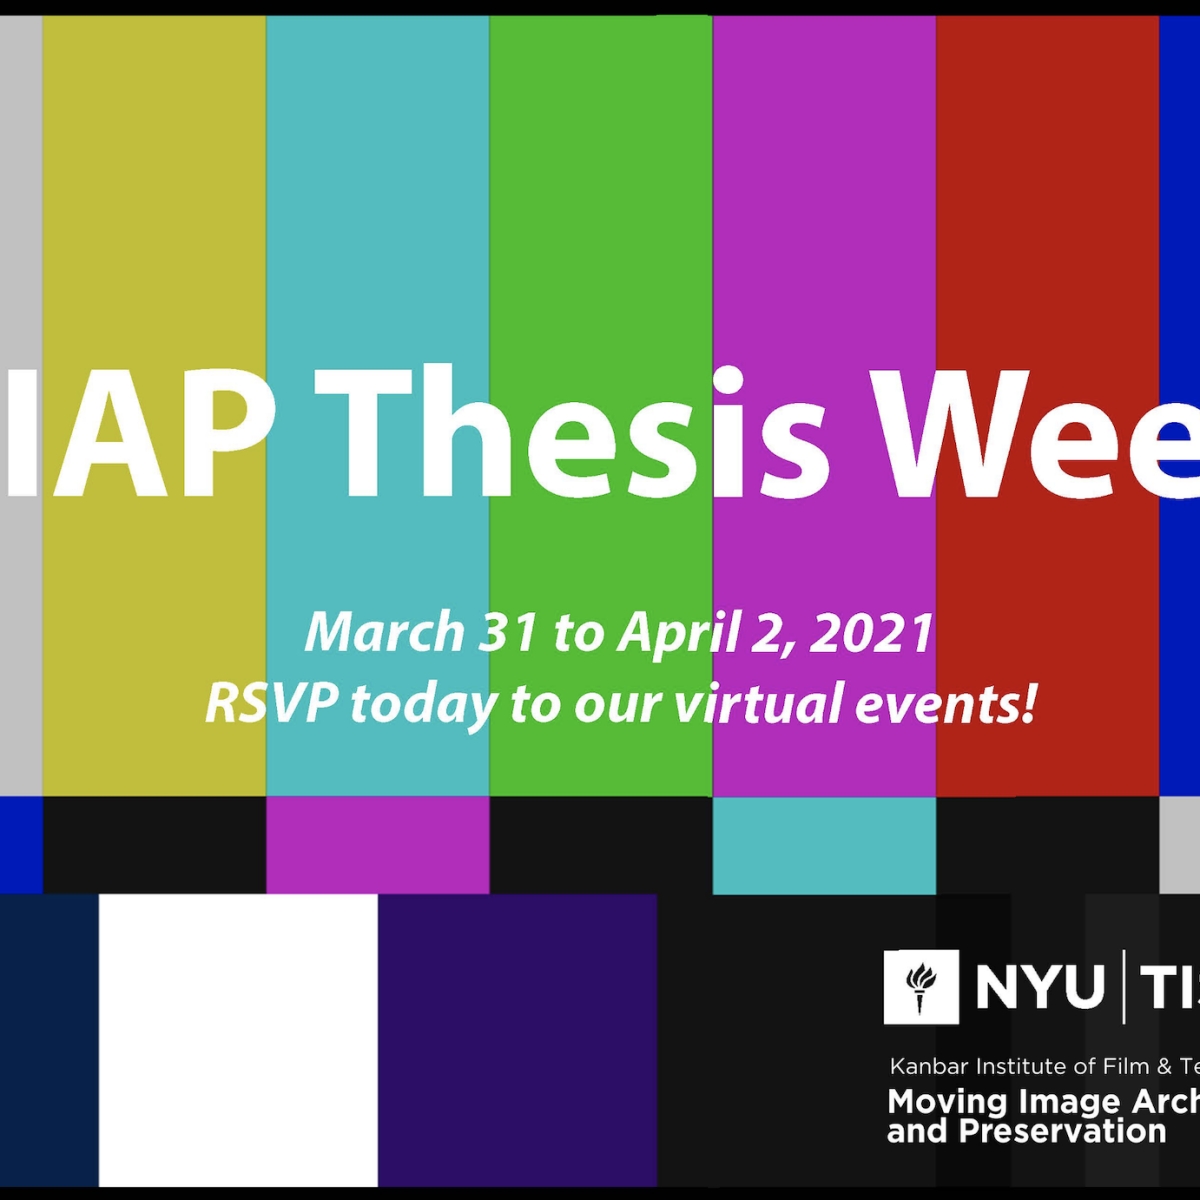 an image of color bars with the title "MIAP thesis week" overlaid, with dates underneath.